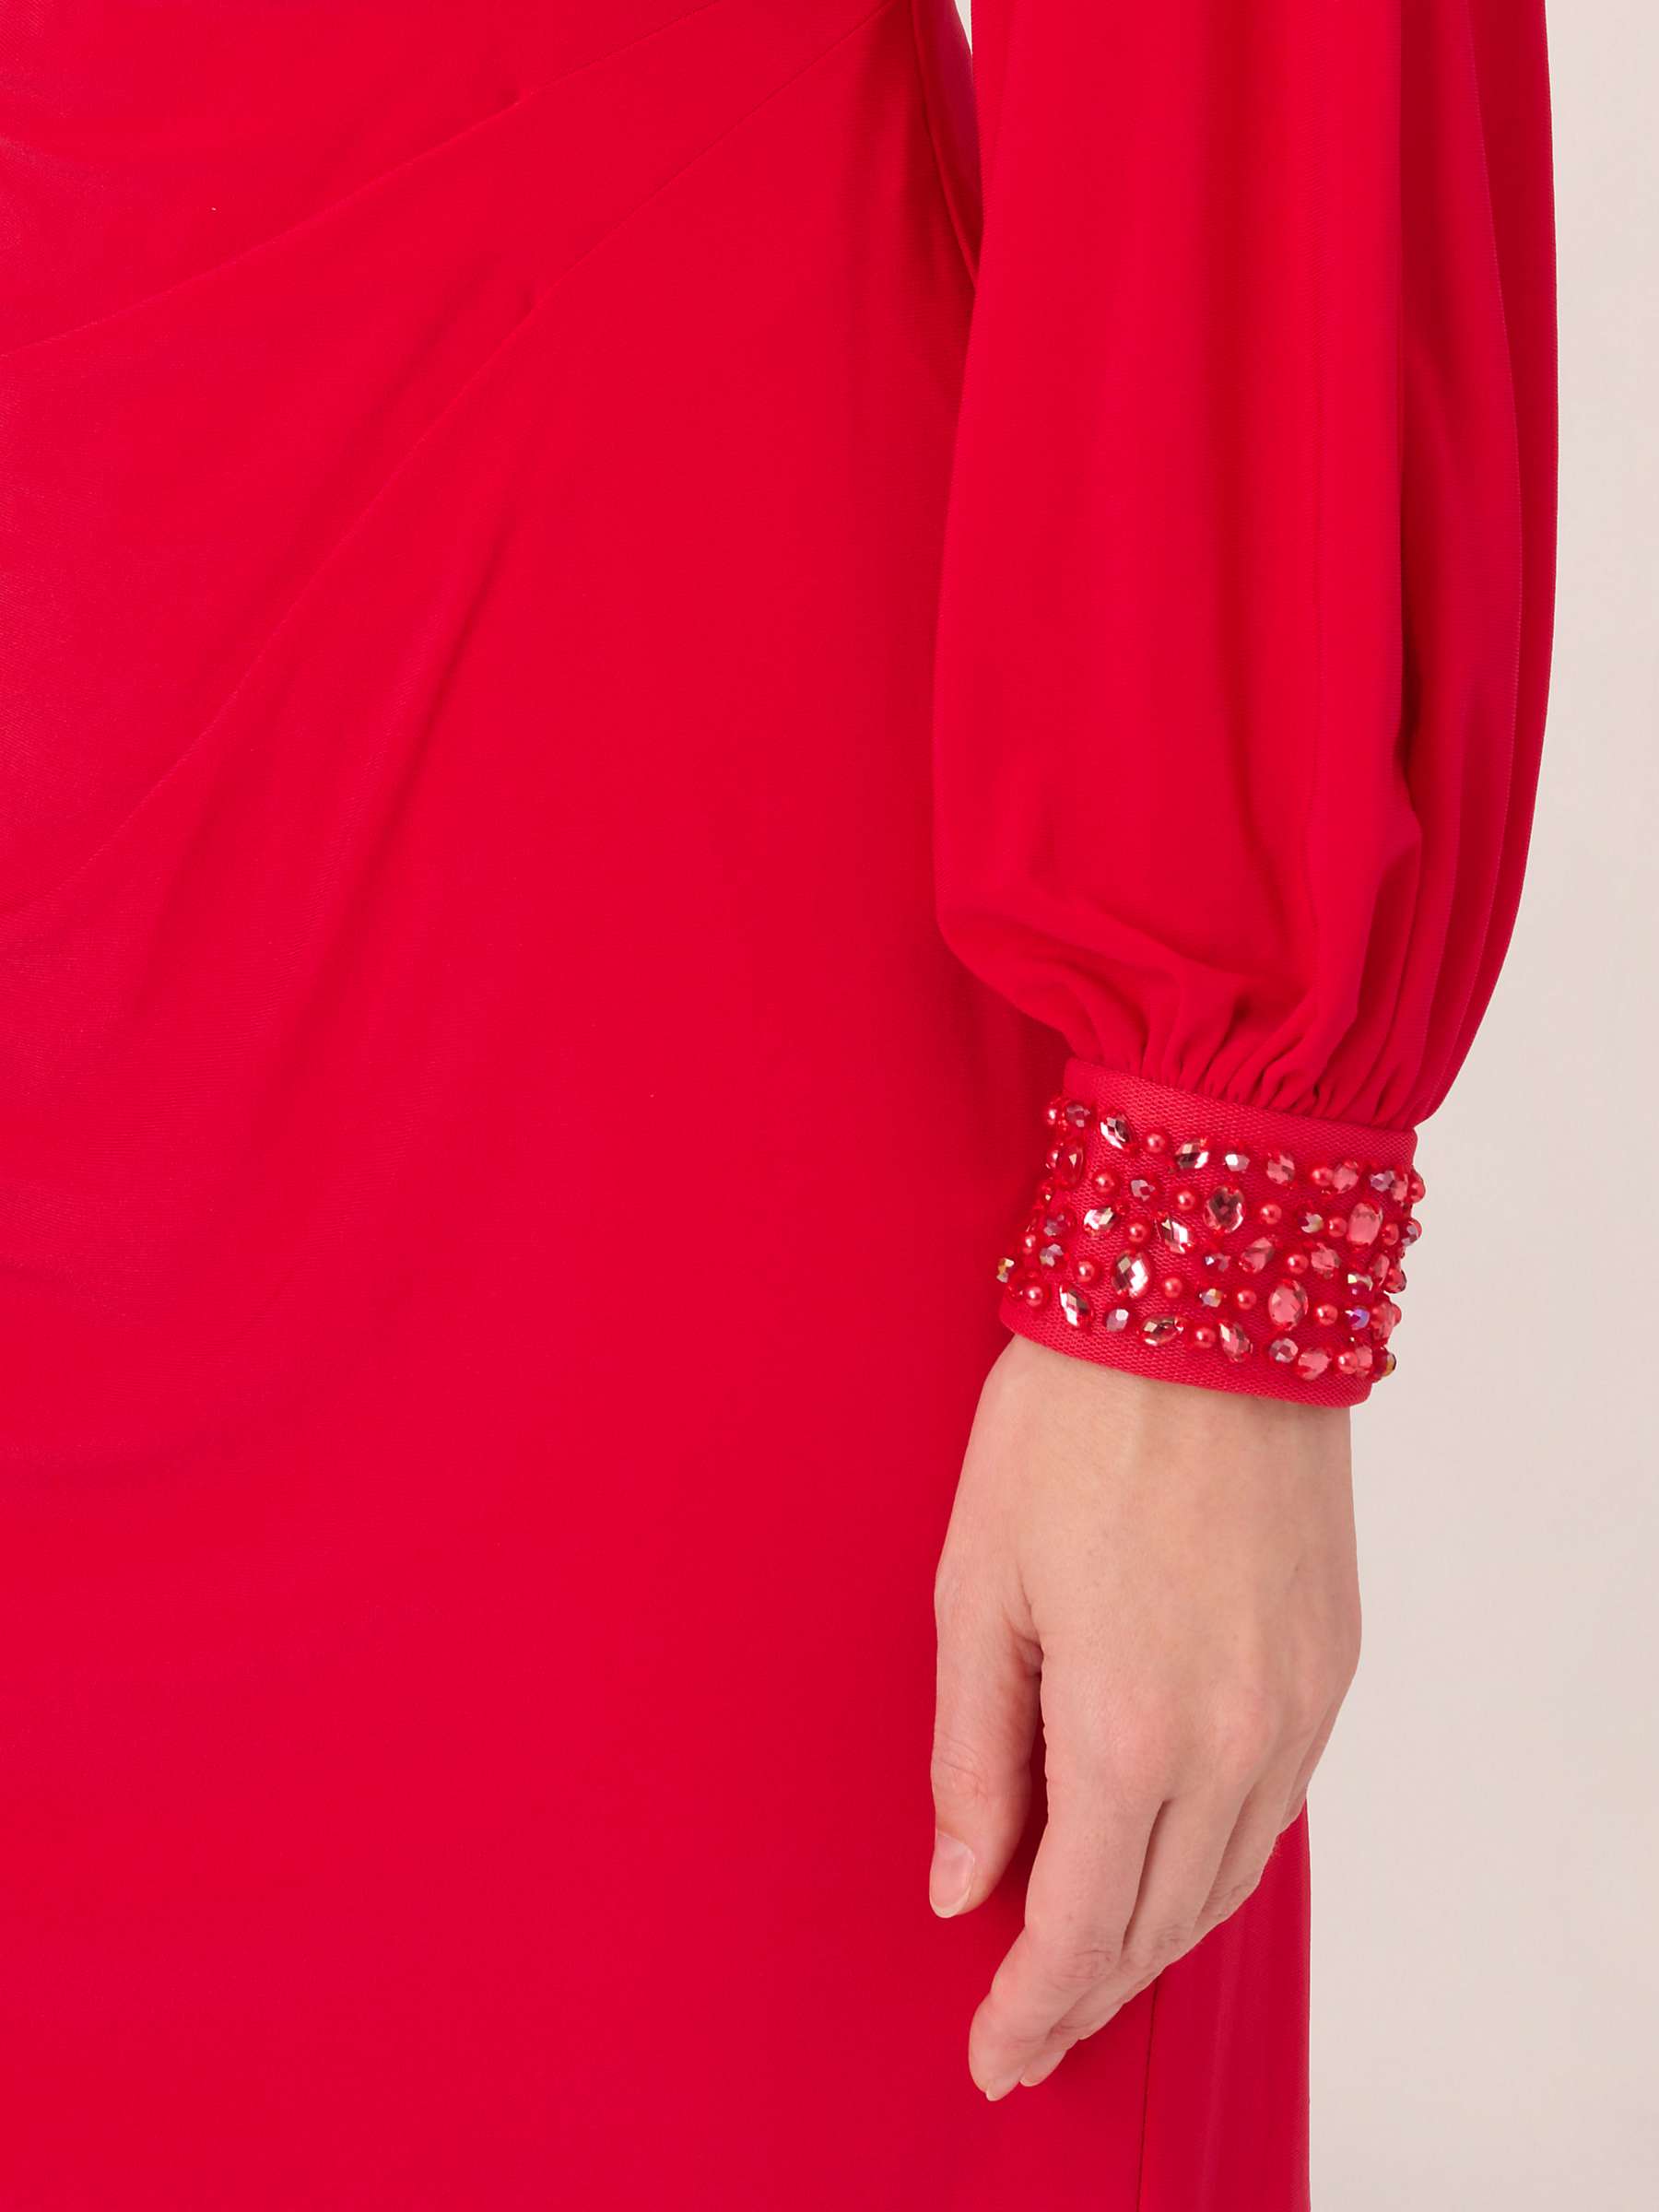 Buy Adrianna Papell Beaded Cuff Short Jersey Dress, Hot Ruby Online at johnlewis.com